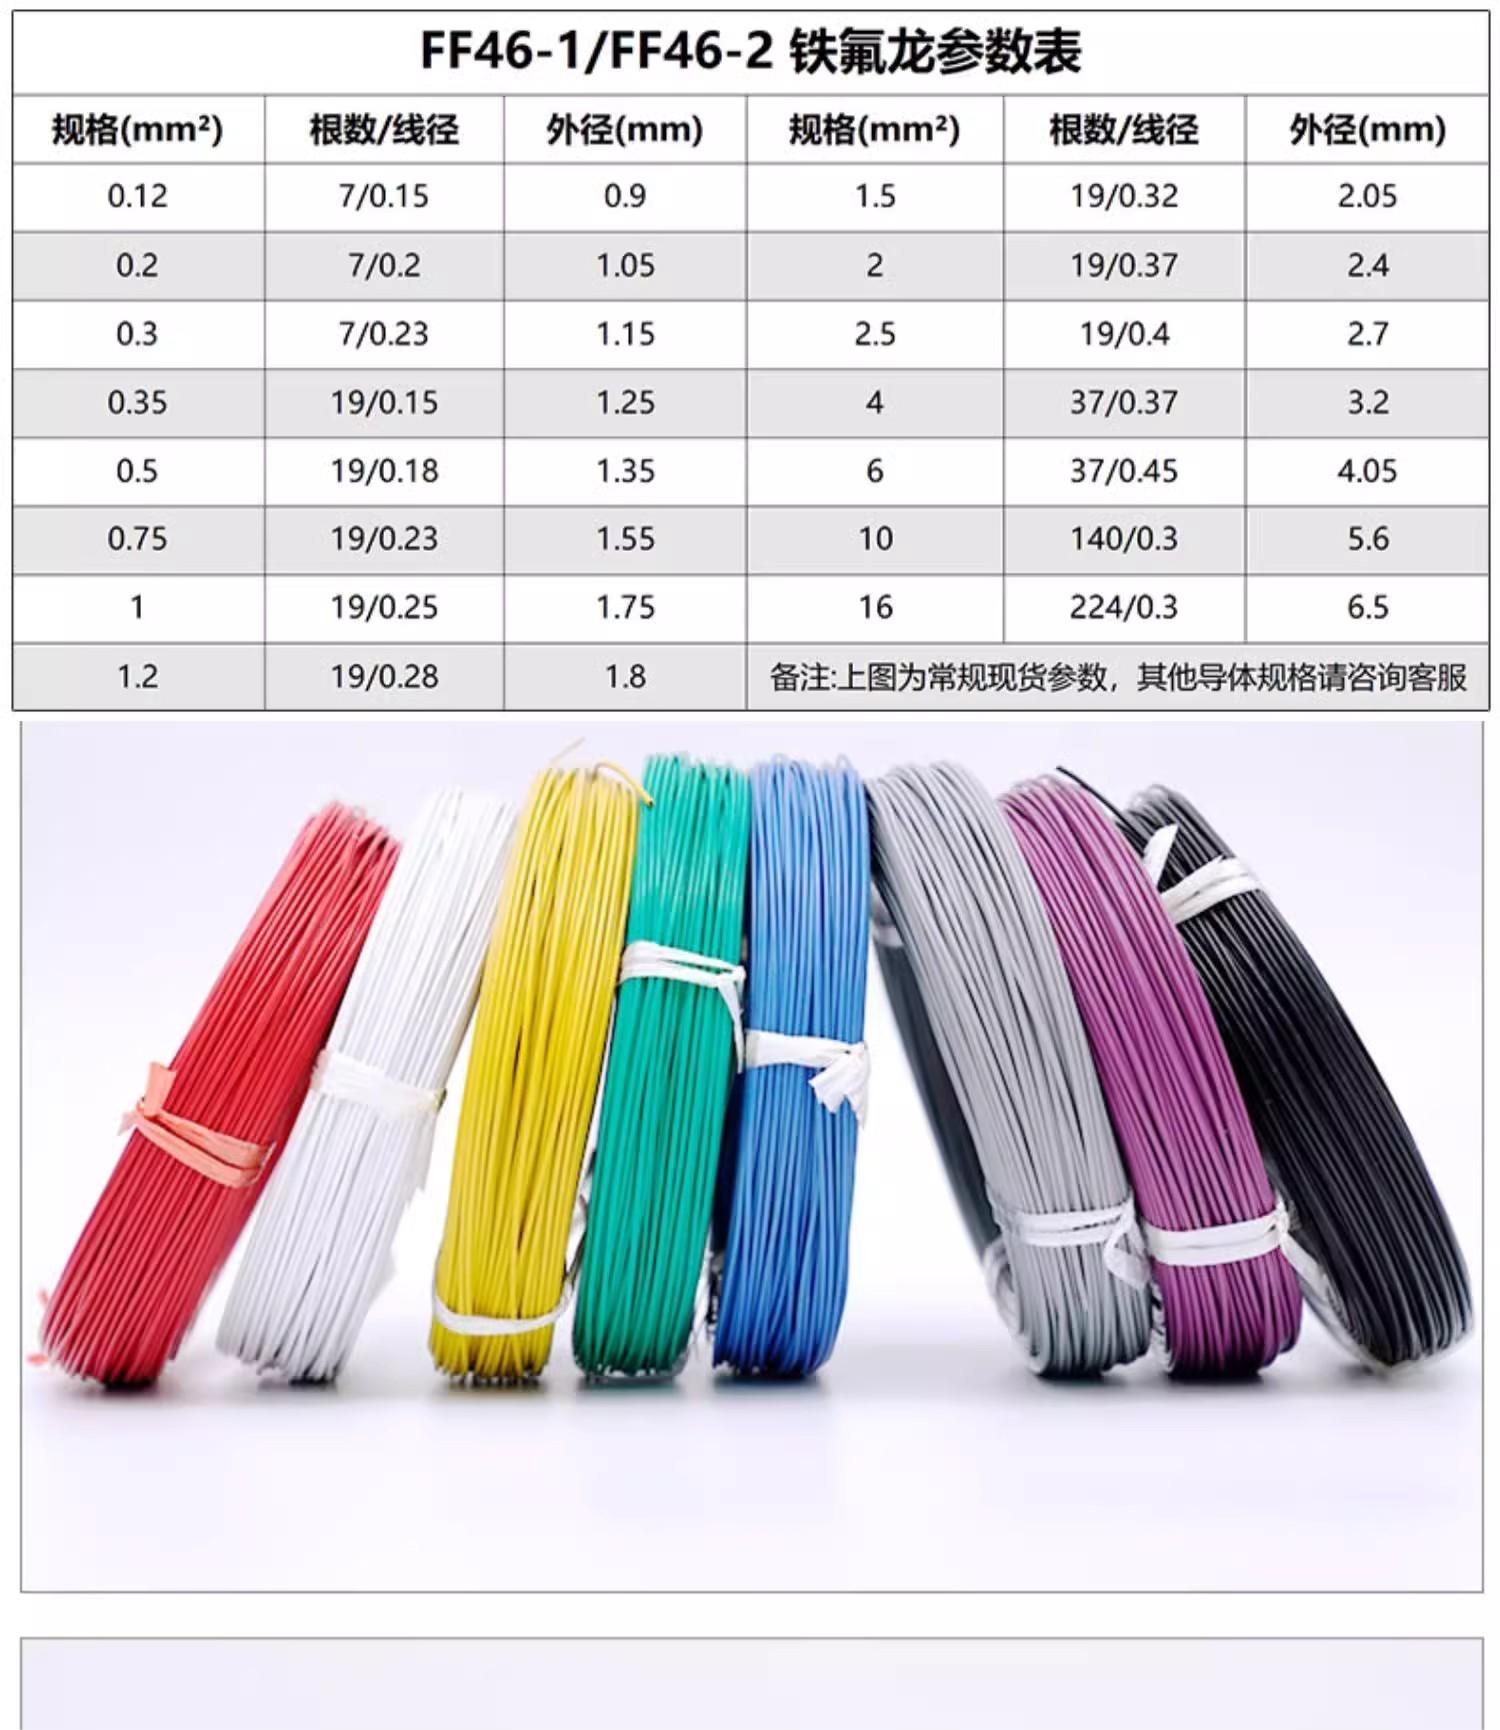 Teflon tinned copper core wire, metal cable, high-voltage wire, high-temperature wire, irradiation cross-linked wire, 200 ℃, 2.5m ㎡